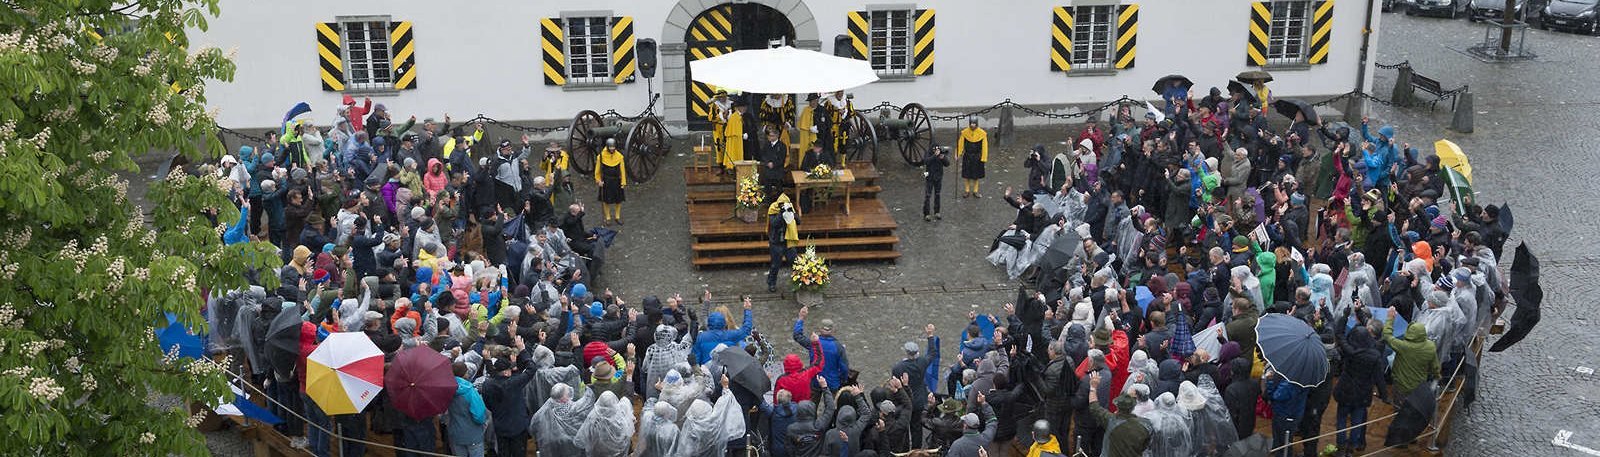 Assembly in front of the arsenal in Altdorf